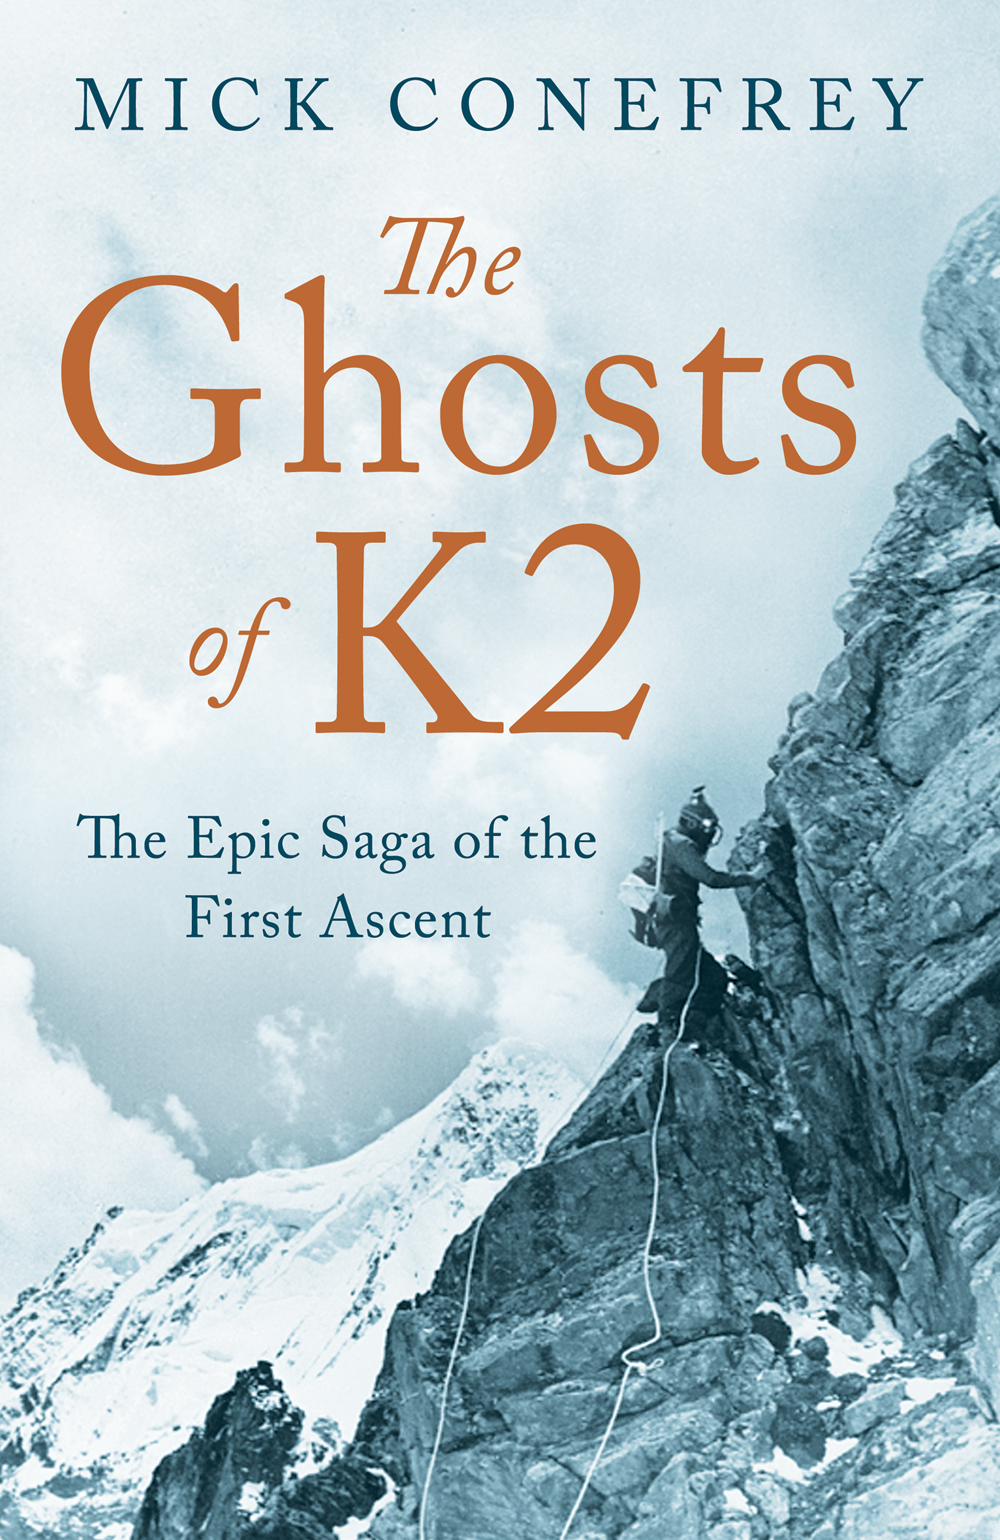 The ghosts of K2. The epic saga of the first ascent